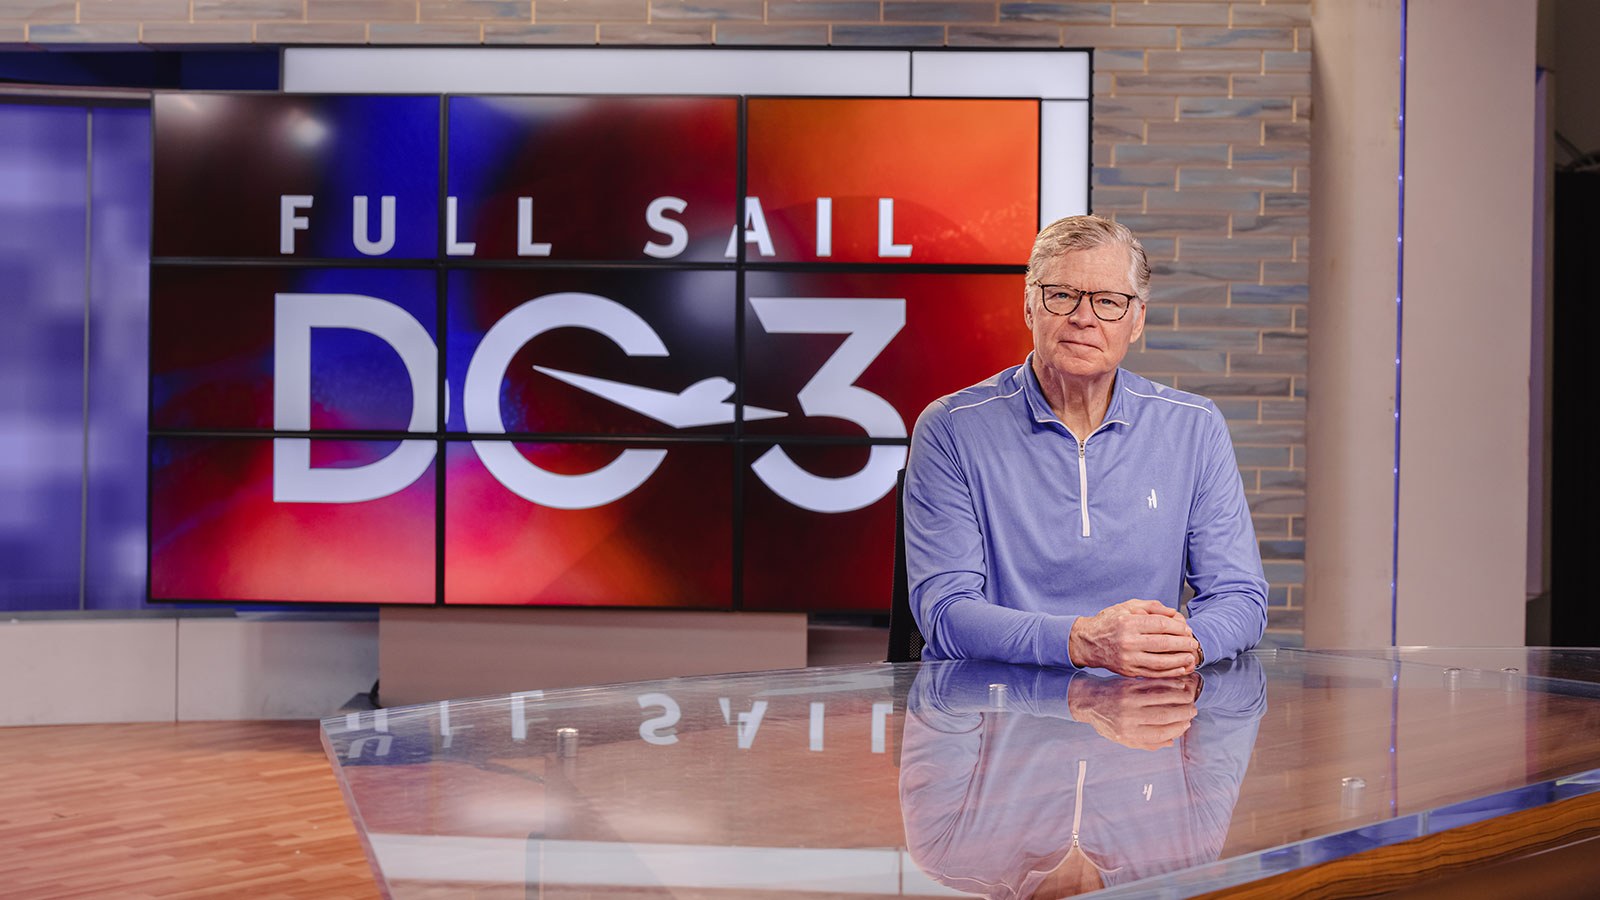 Photograph of Dan Patrick sitting at an anchor desk in front of a screen with Full Sail DC3 logo displayed behind him.